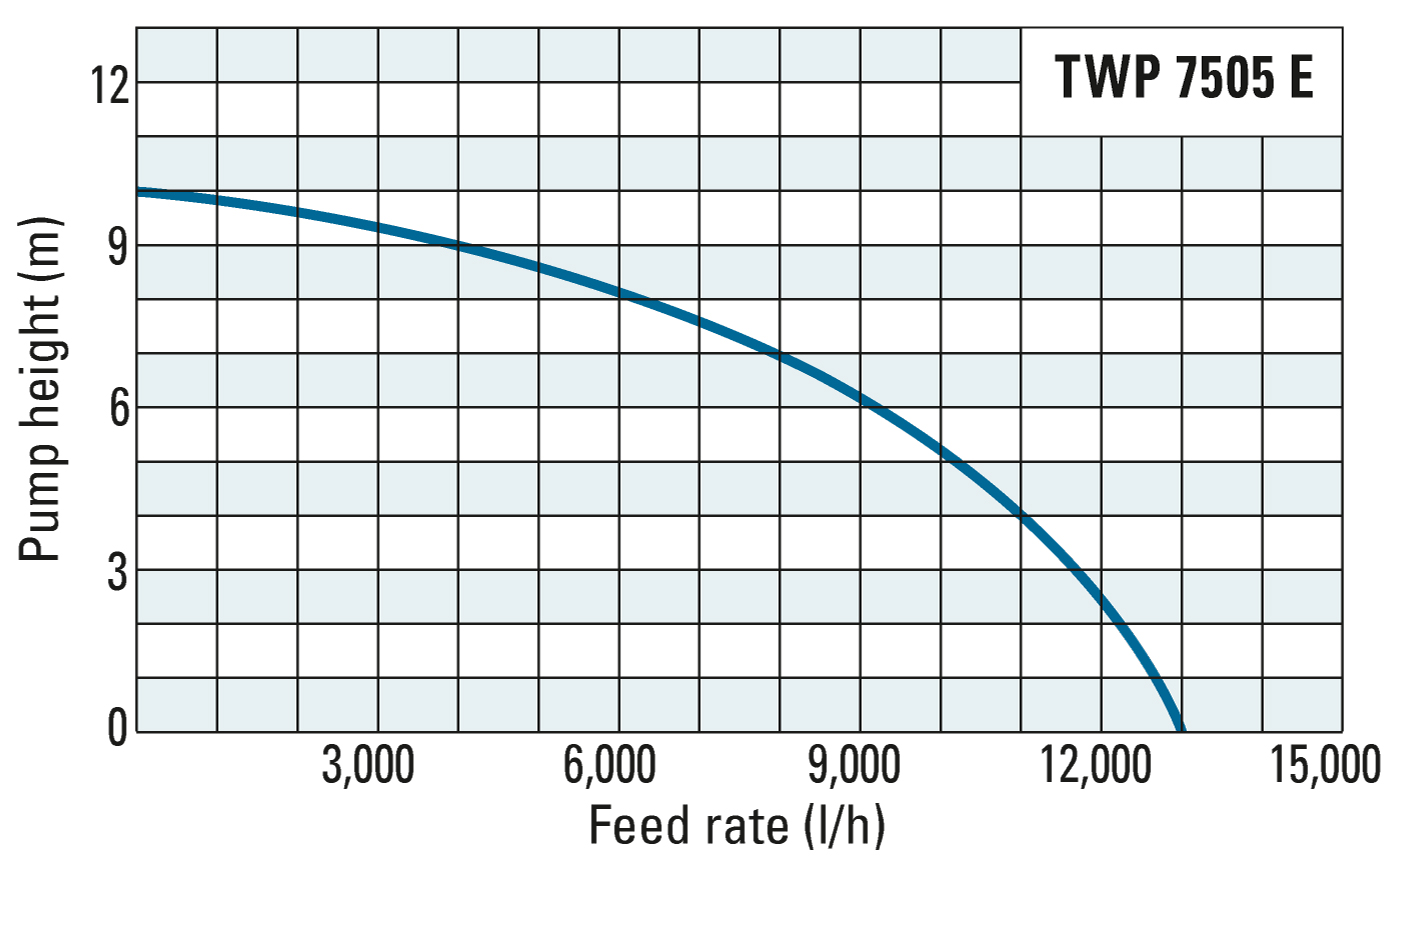 Delivery head and flow rate of the TWP 7505 E